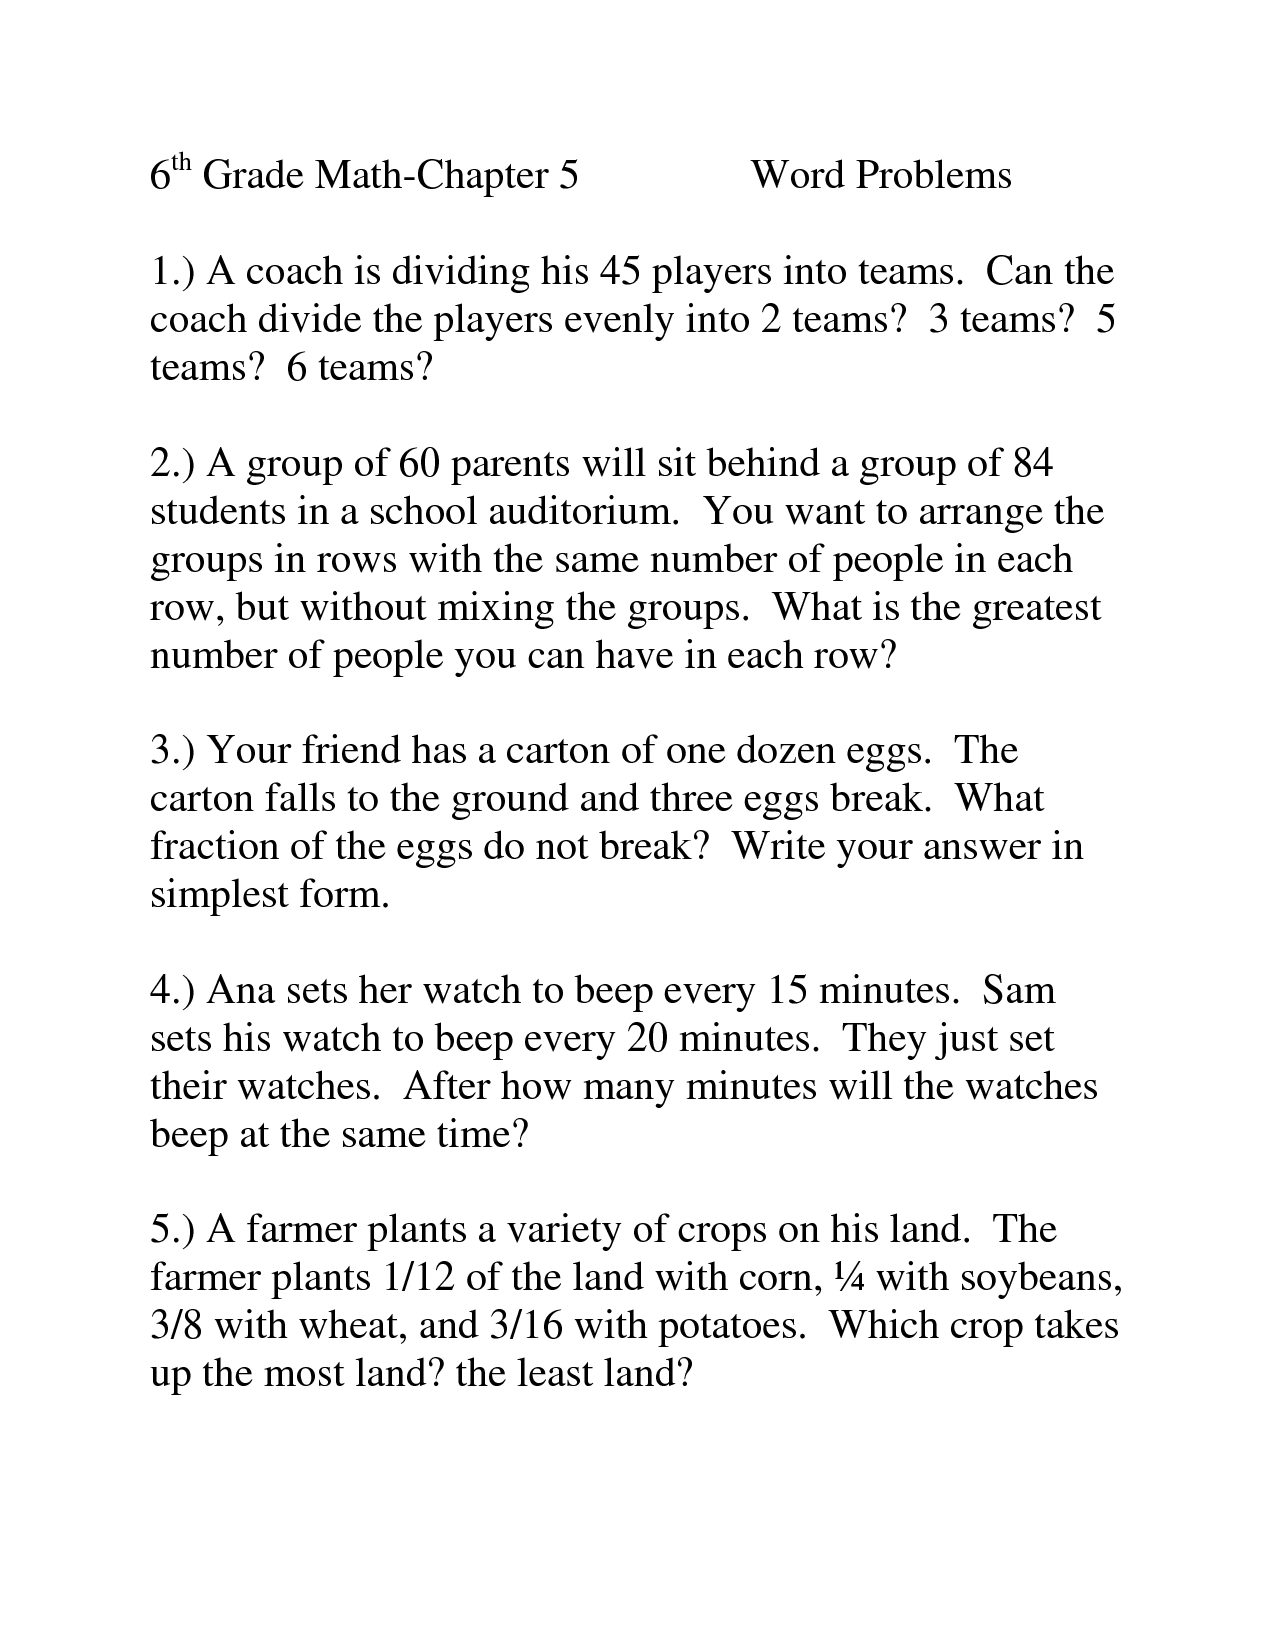 13-best-images-of-dividing-fractions-word-problems-5th-grade-math